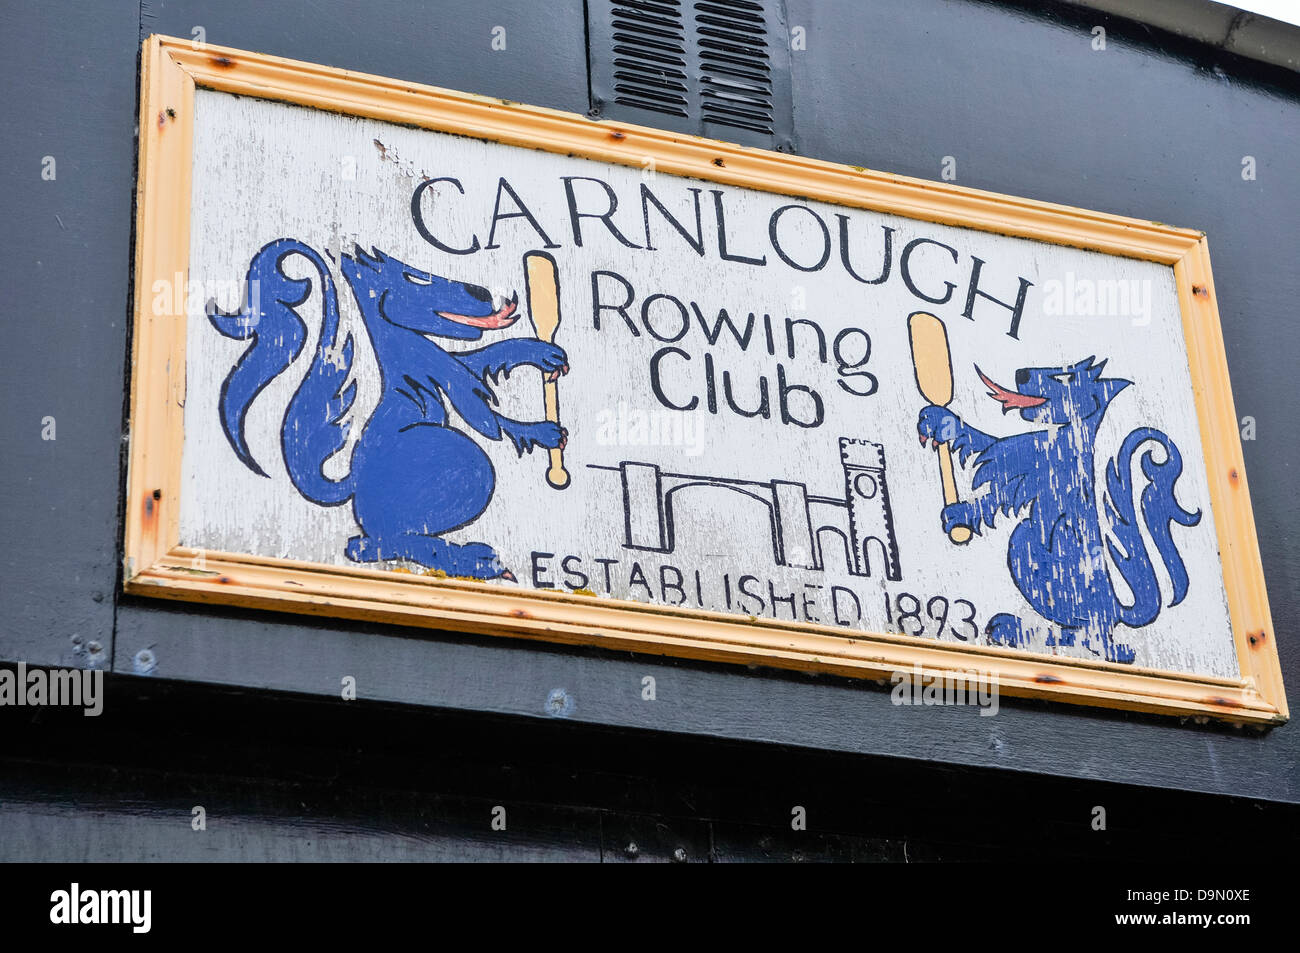 Carnlough Rowing Club Banque D'Images